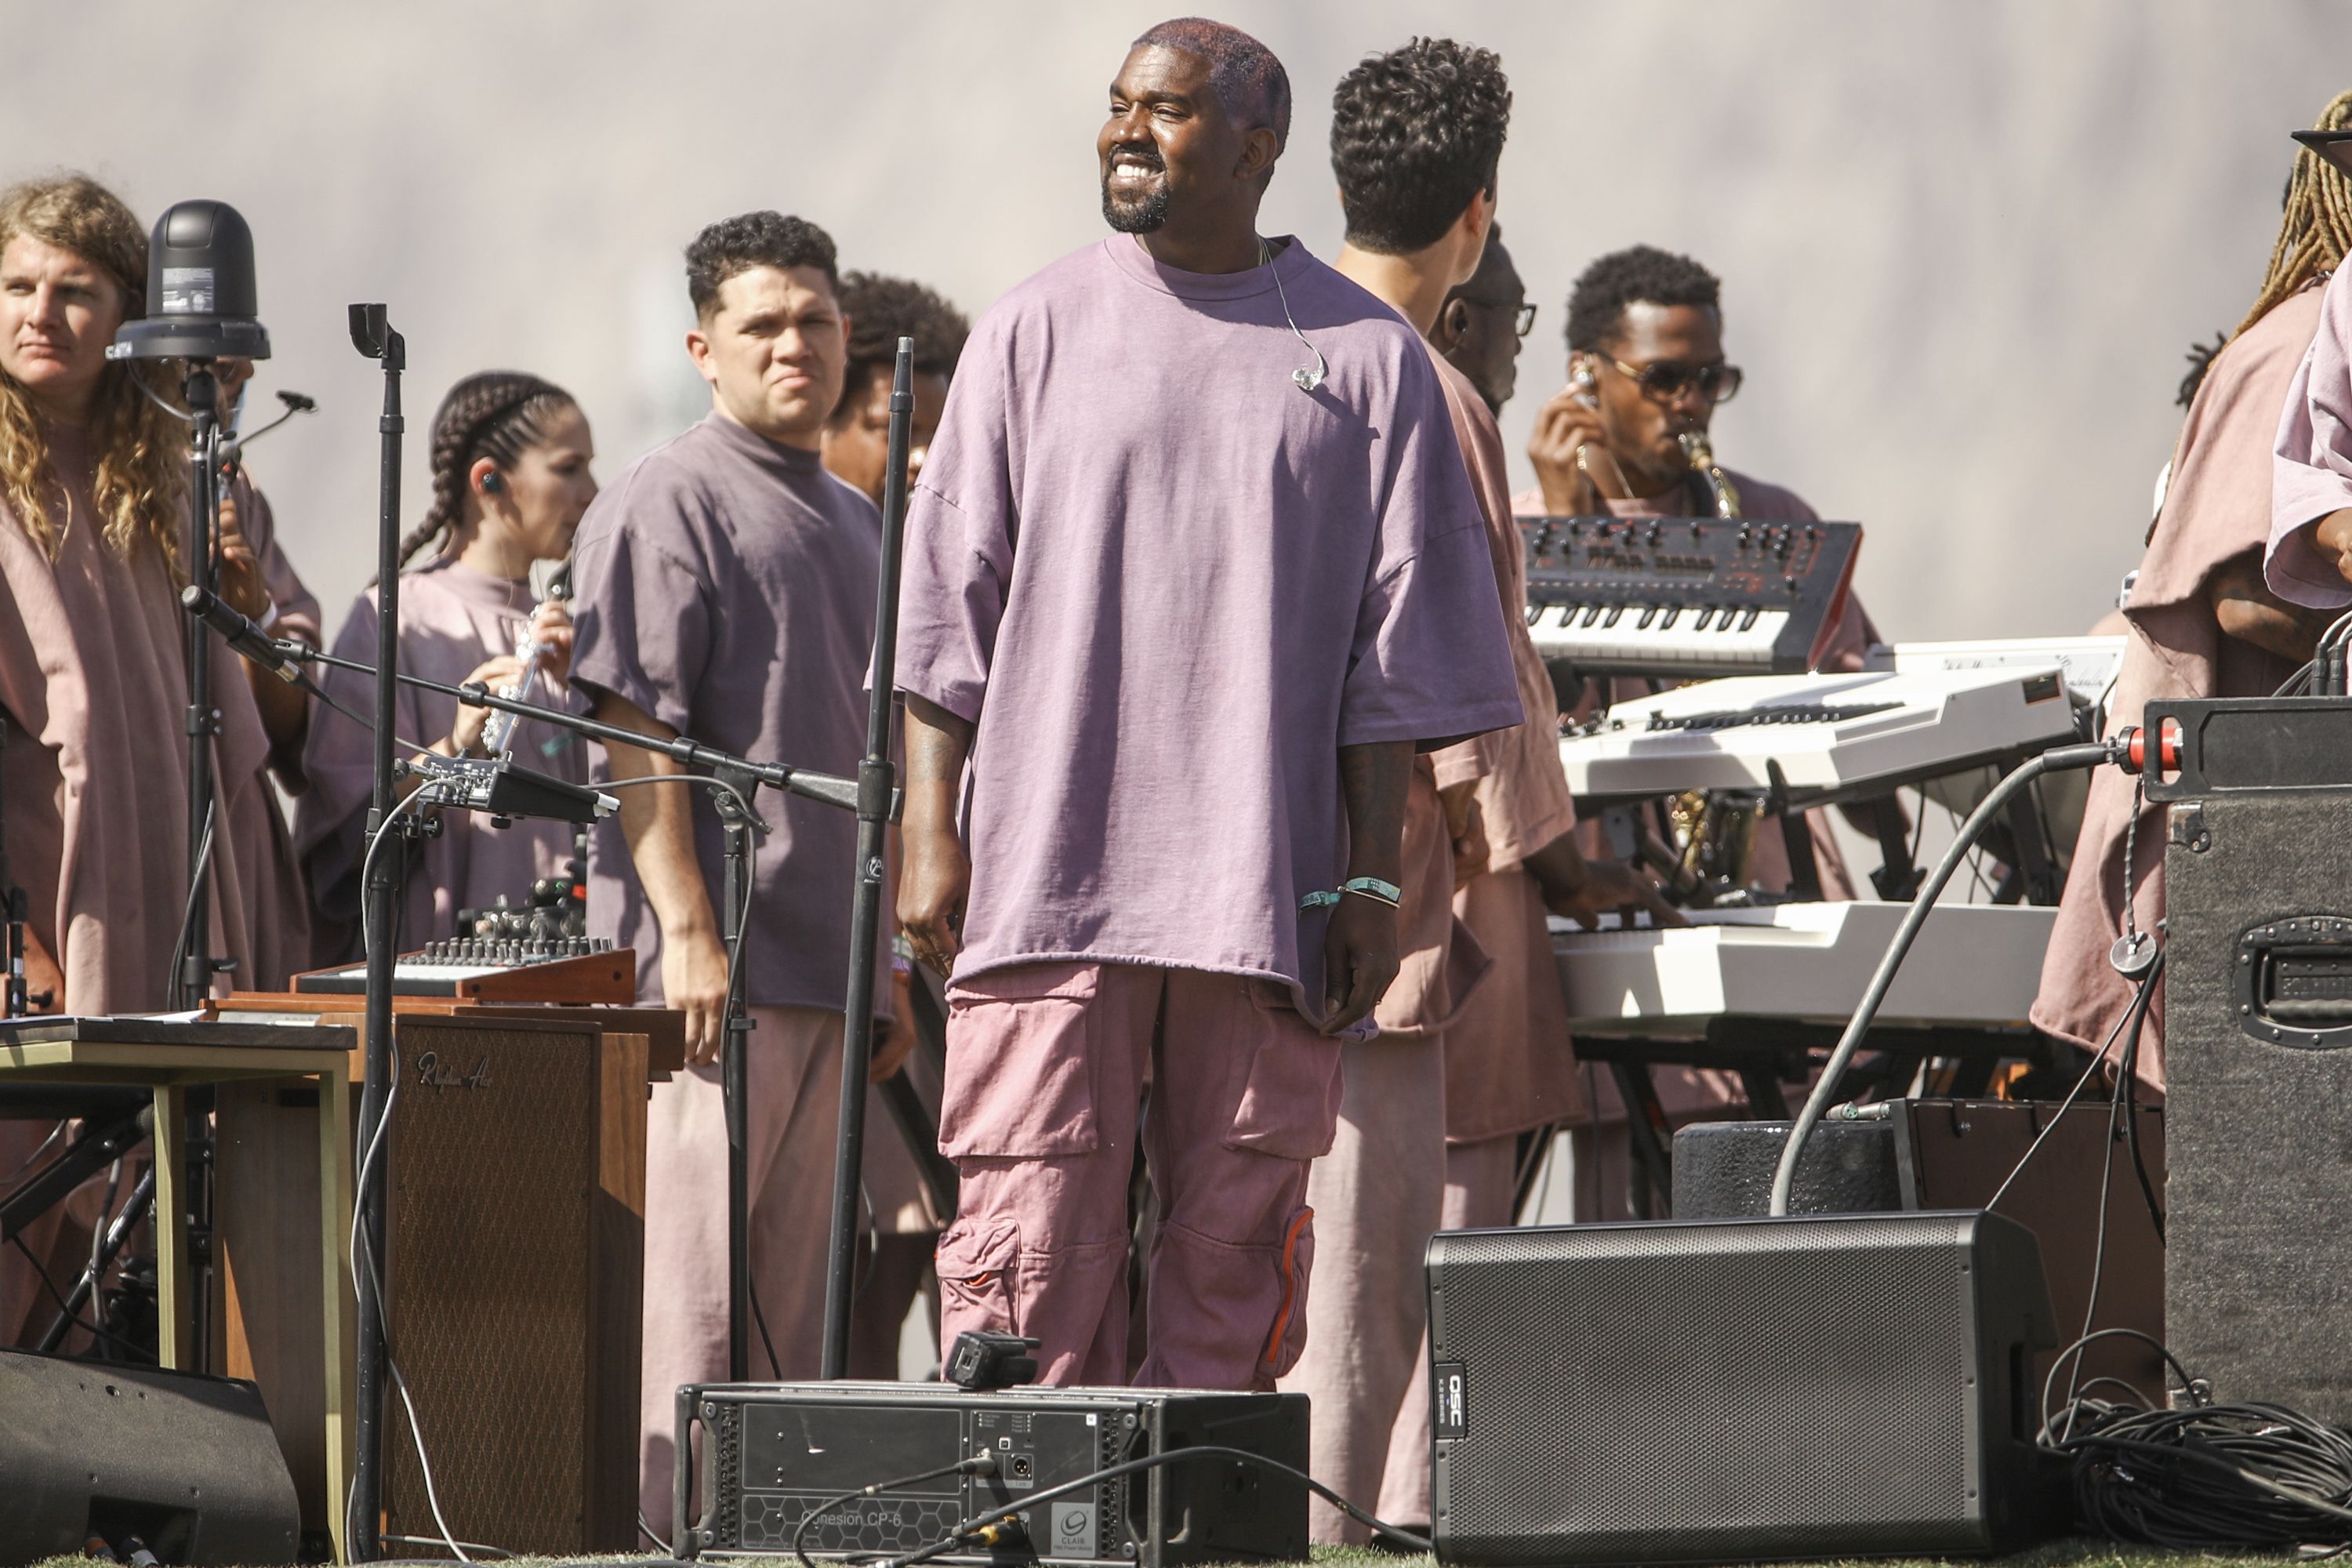 Kanye West performs Sunday Service during the 2019 Coachella Valley Music And Arts Festival on April 21, 2019 in Indio, California. | Source: Getty Images